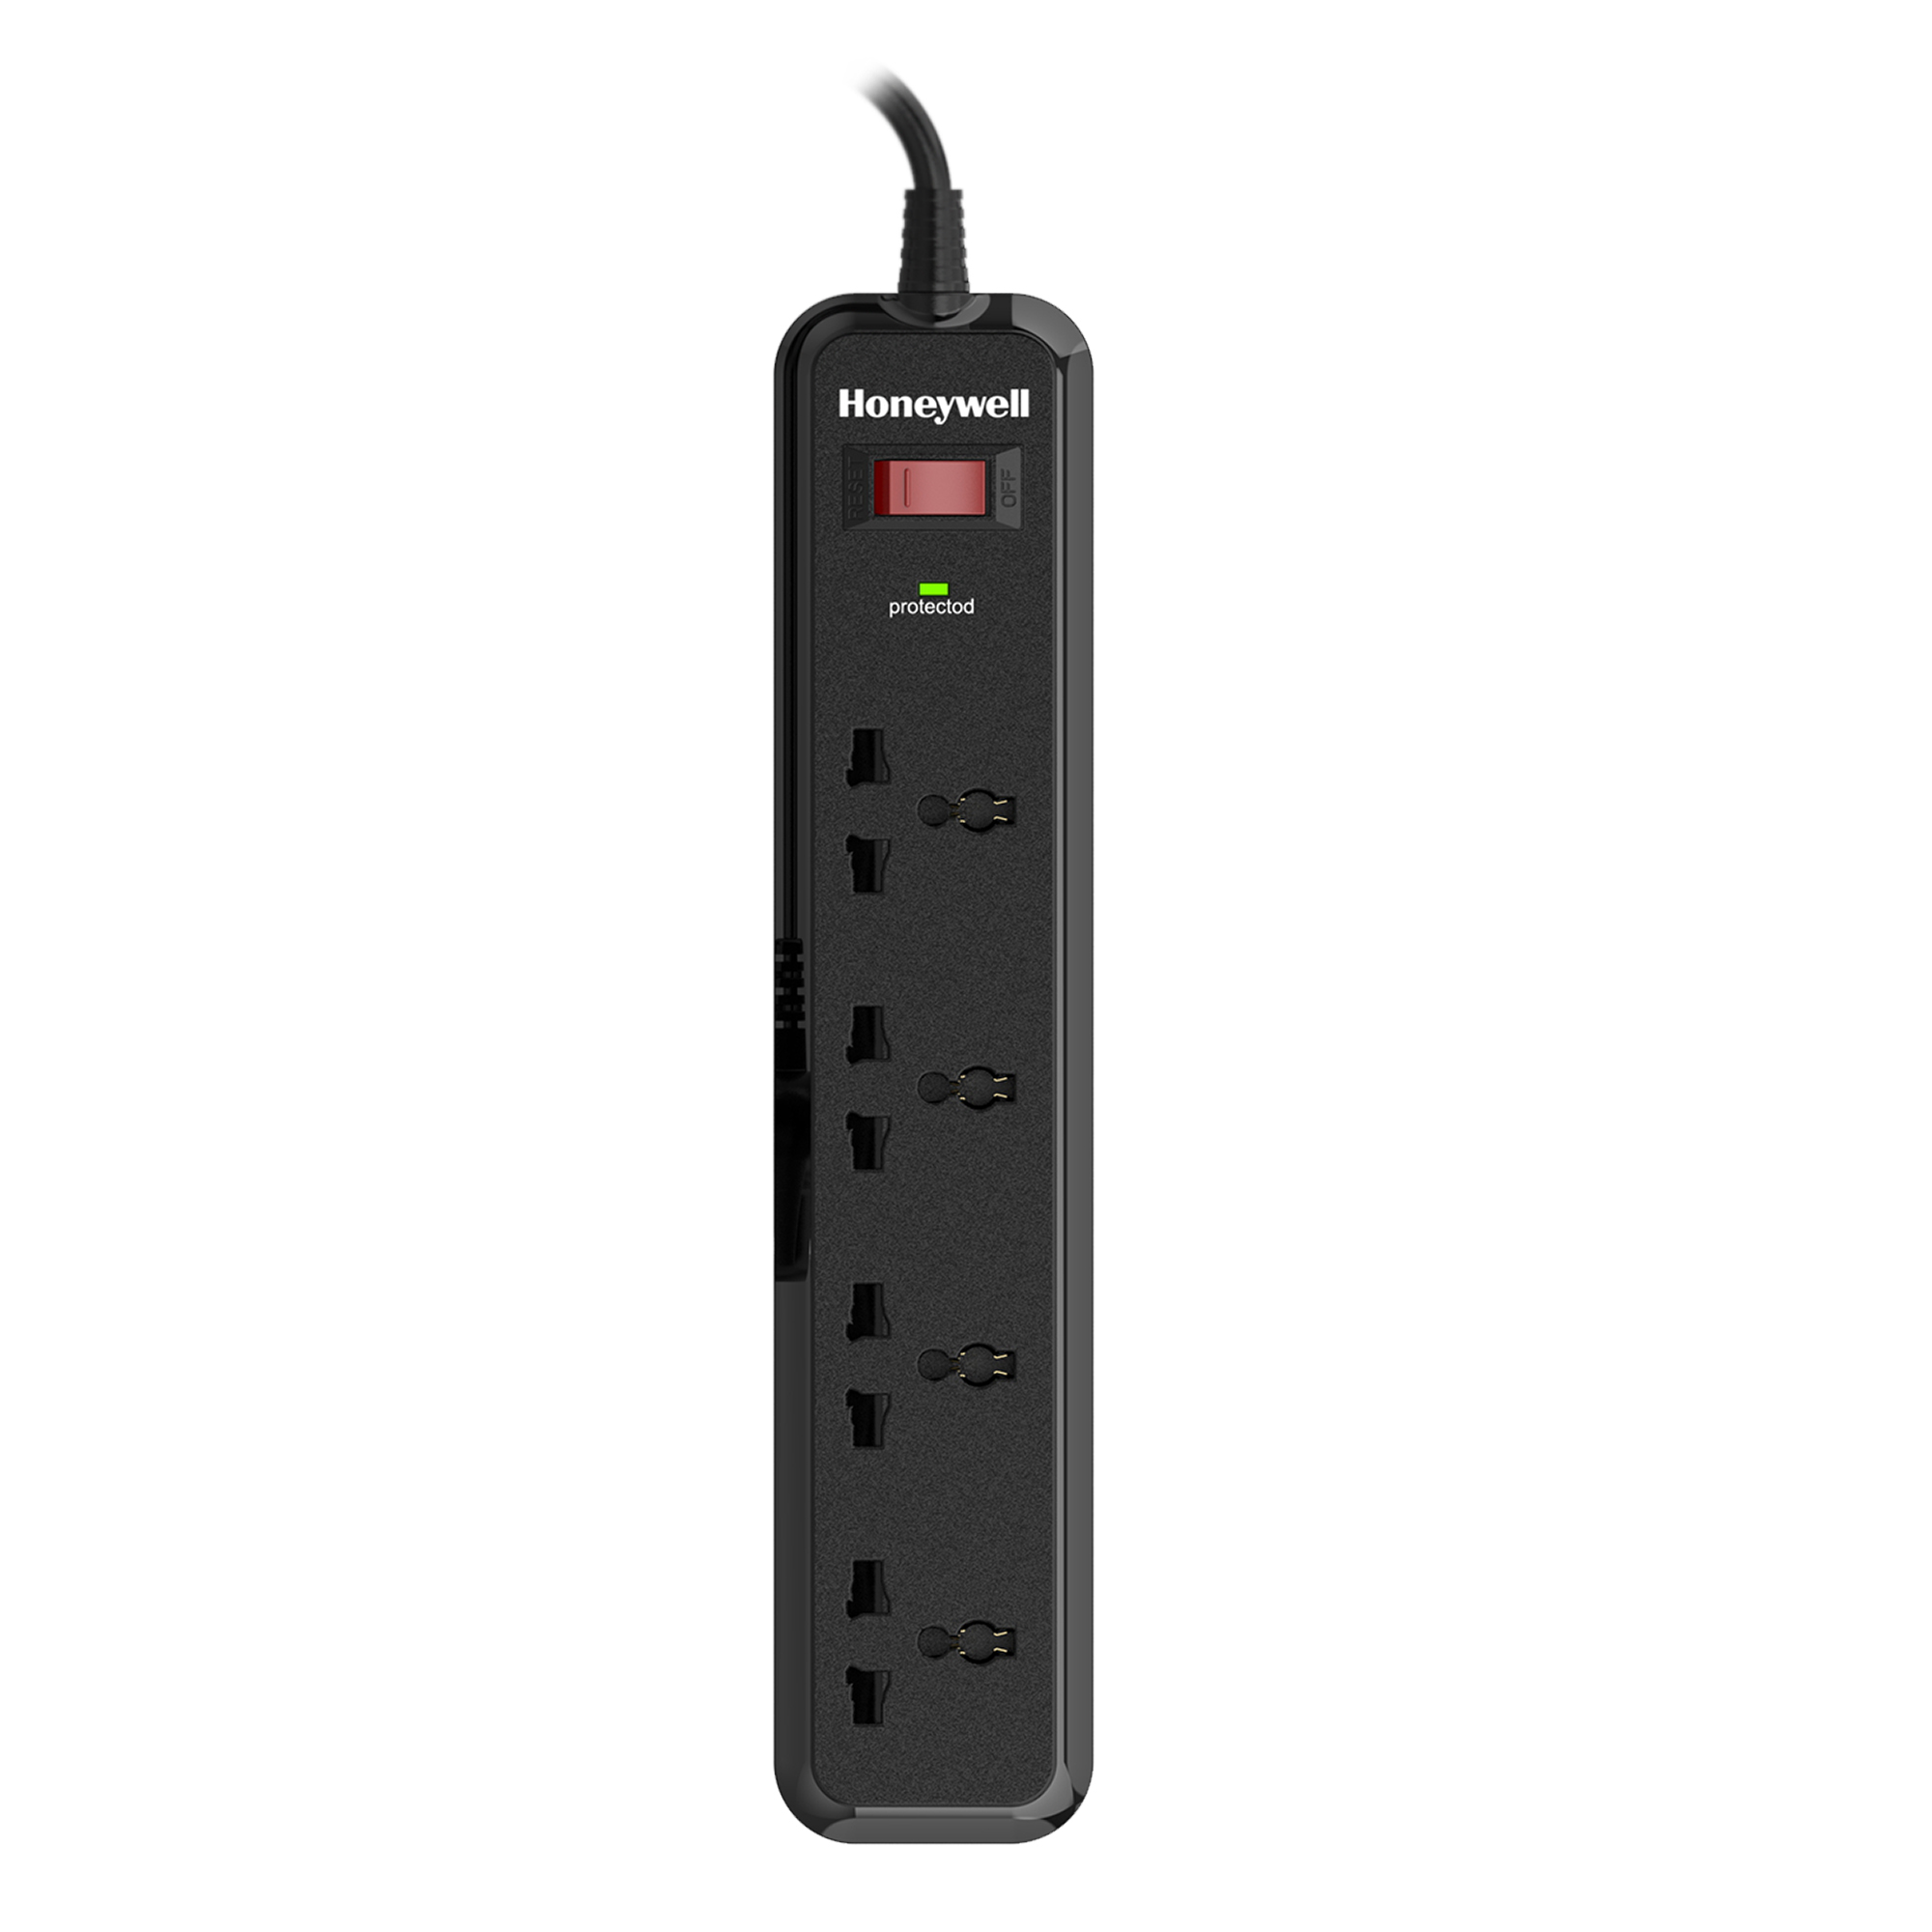 Honeywell Surge Protector with 4 Universal Socket and 2 meter cord